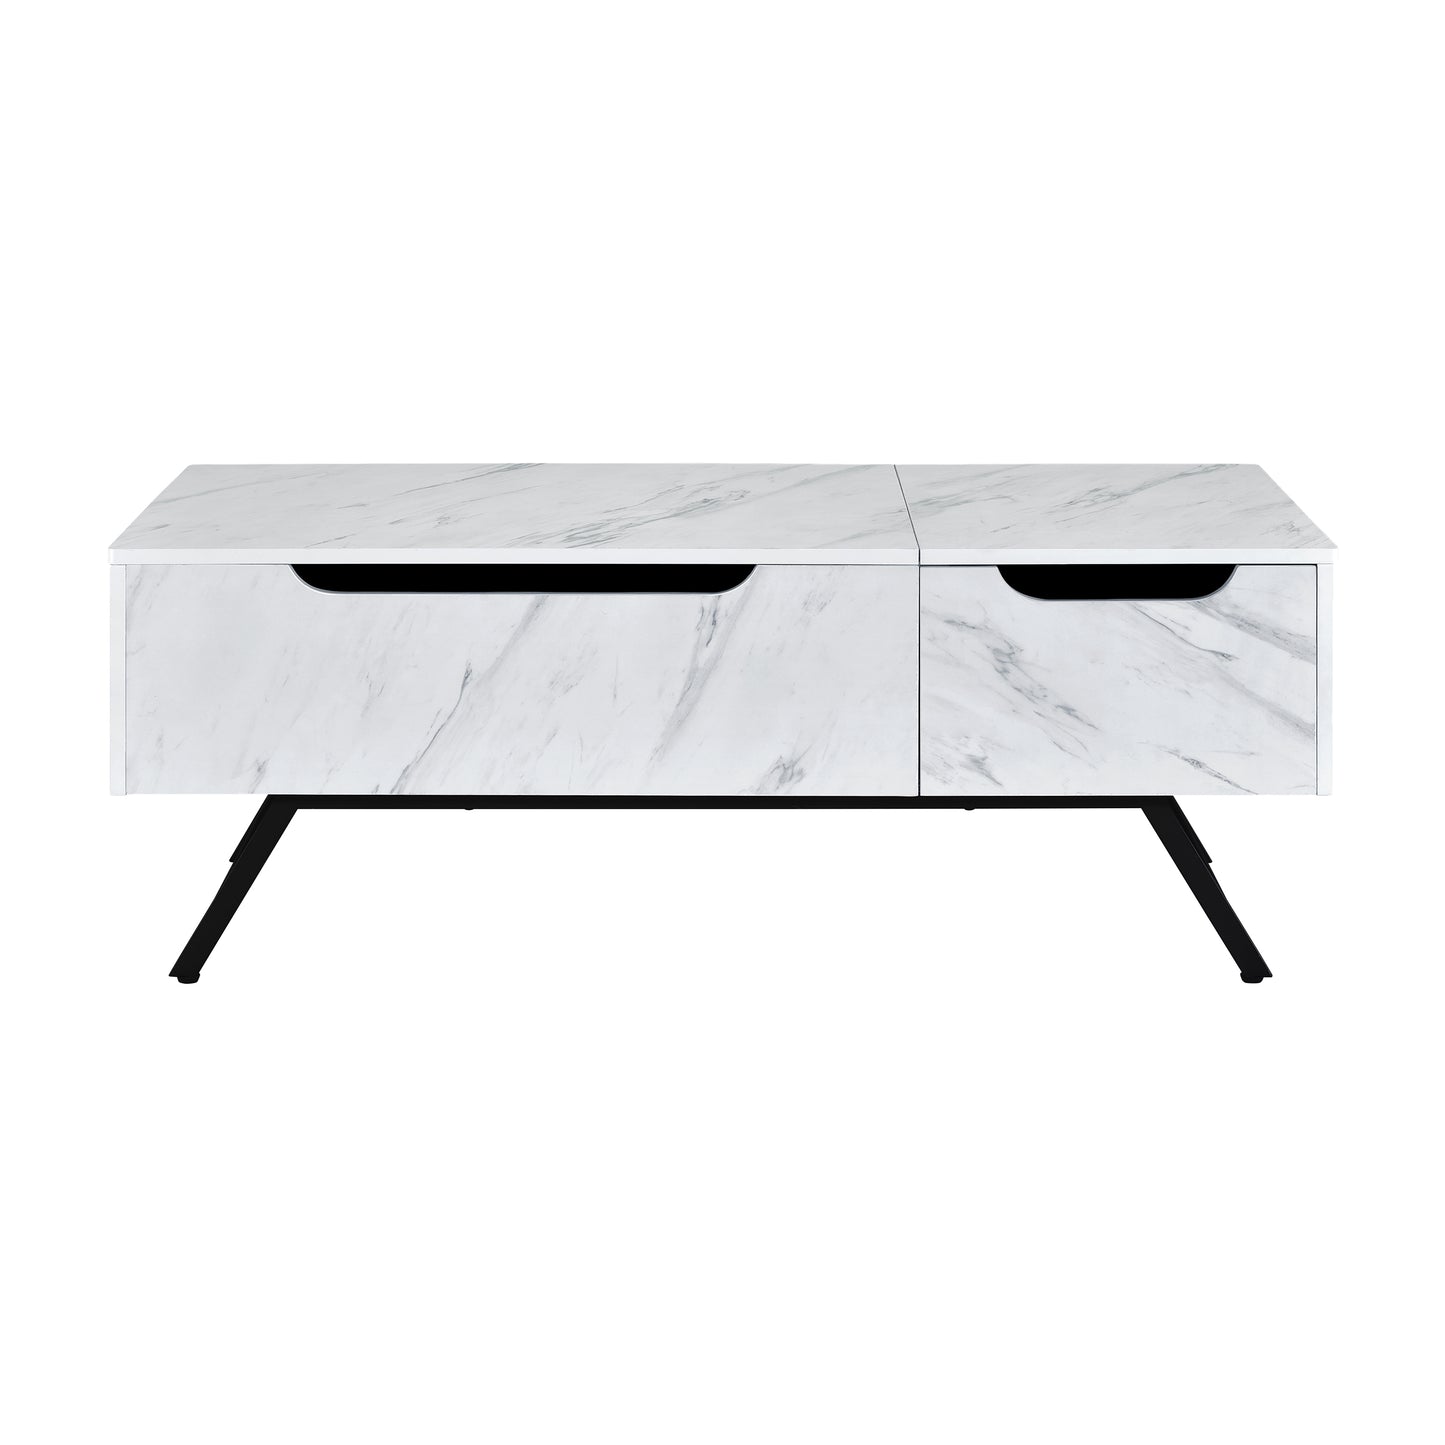 ACME Throm Coffee Table w/Lift Top, White Finish LV00830 - Enova Luxe Home Store